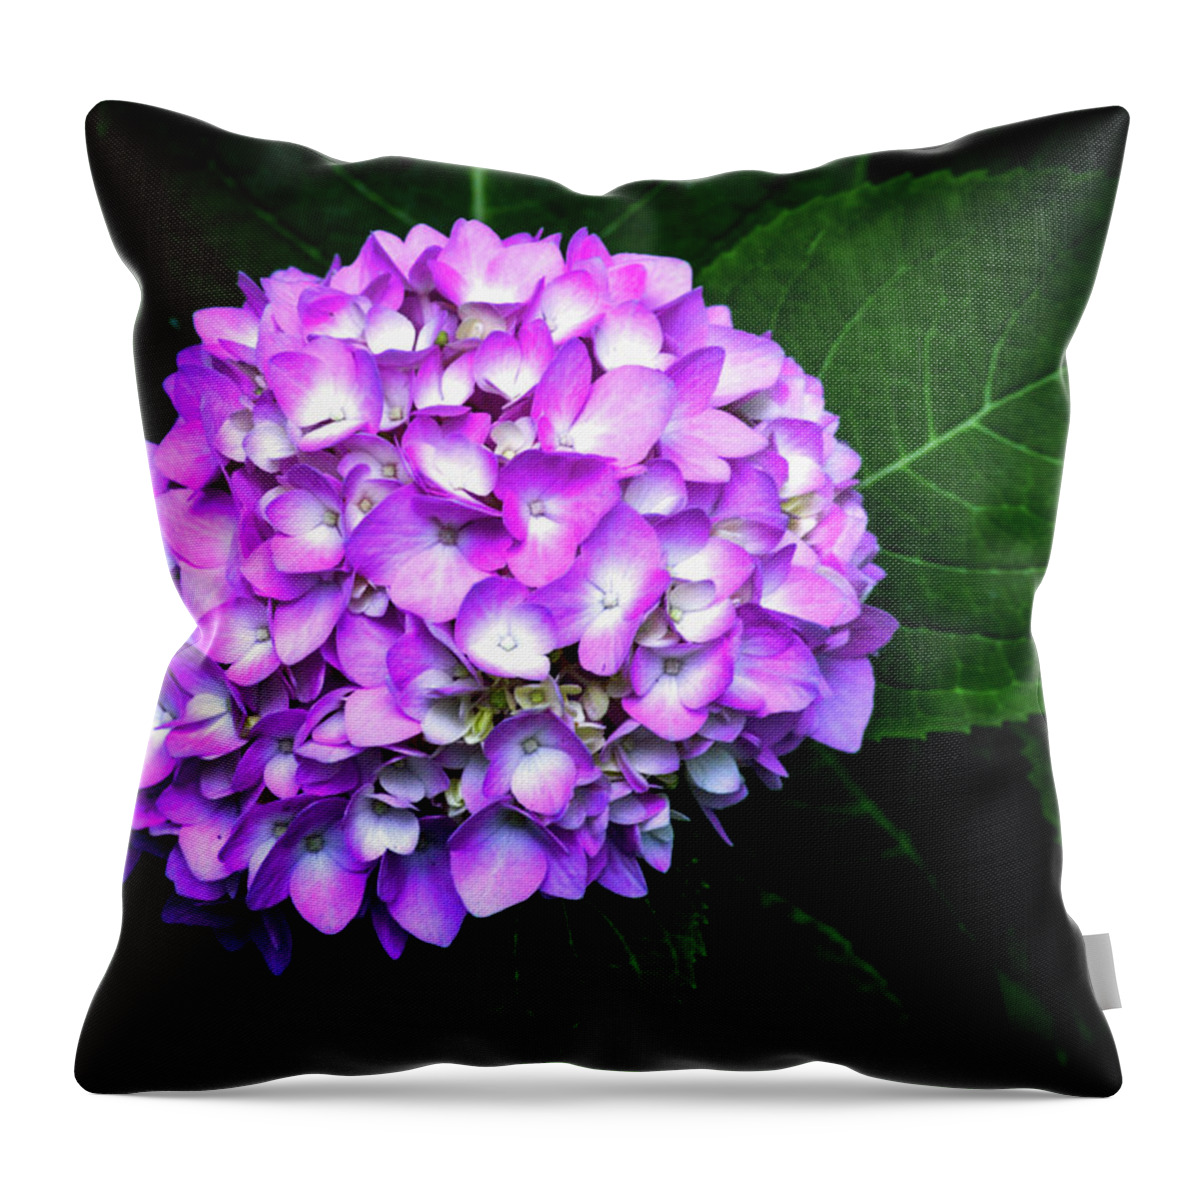 Hydrangea Throw Pillow featuring the photograph Hydrangea by Susie Loechler